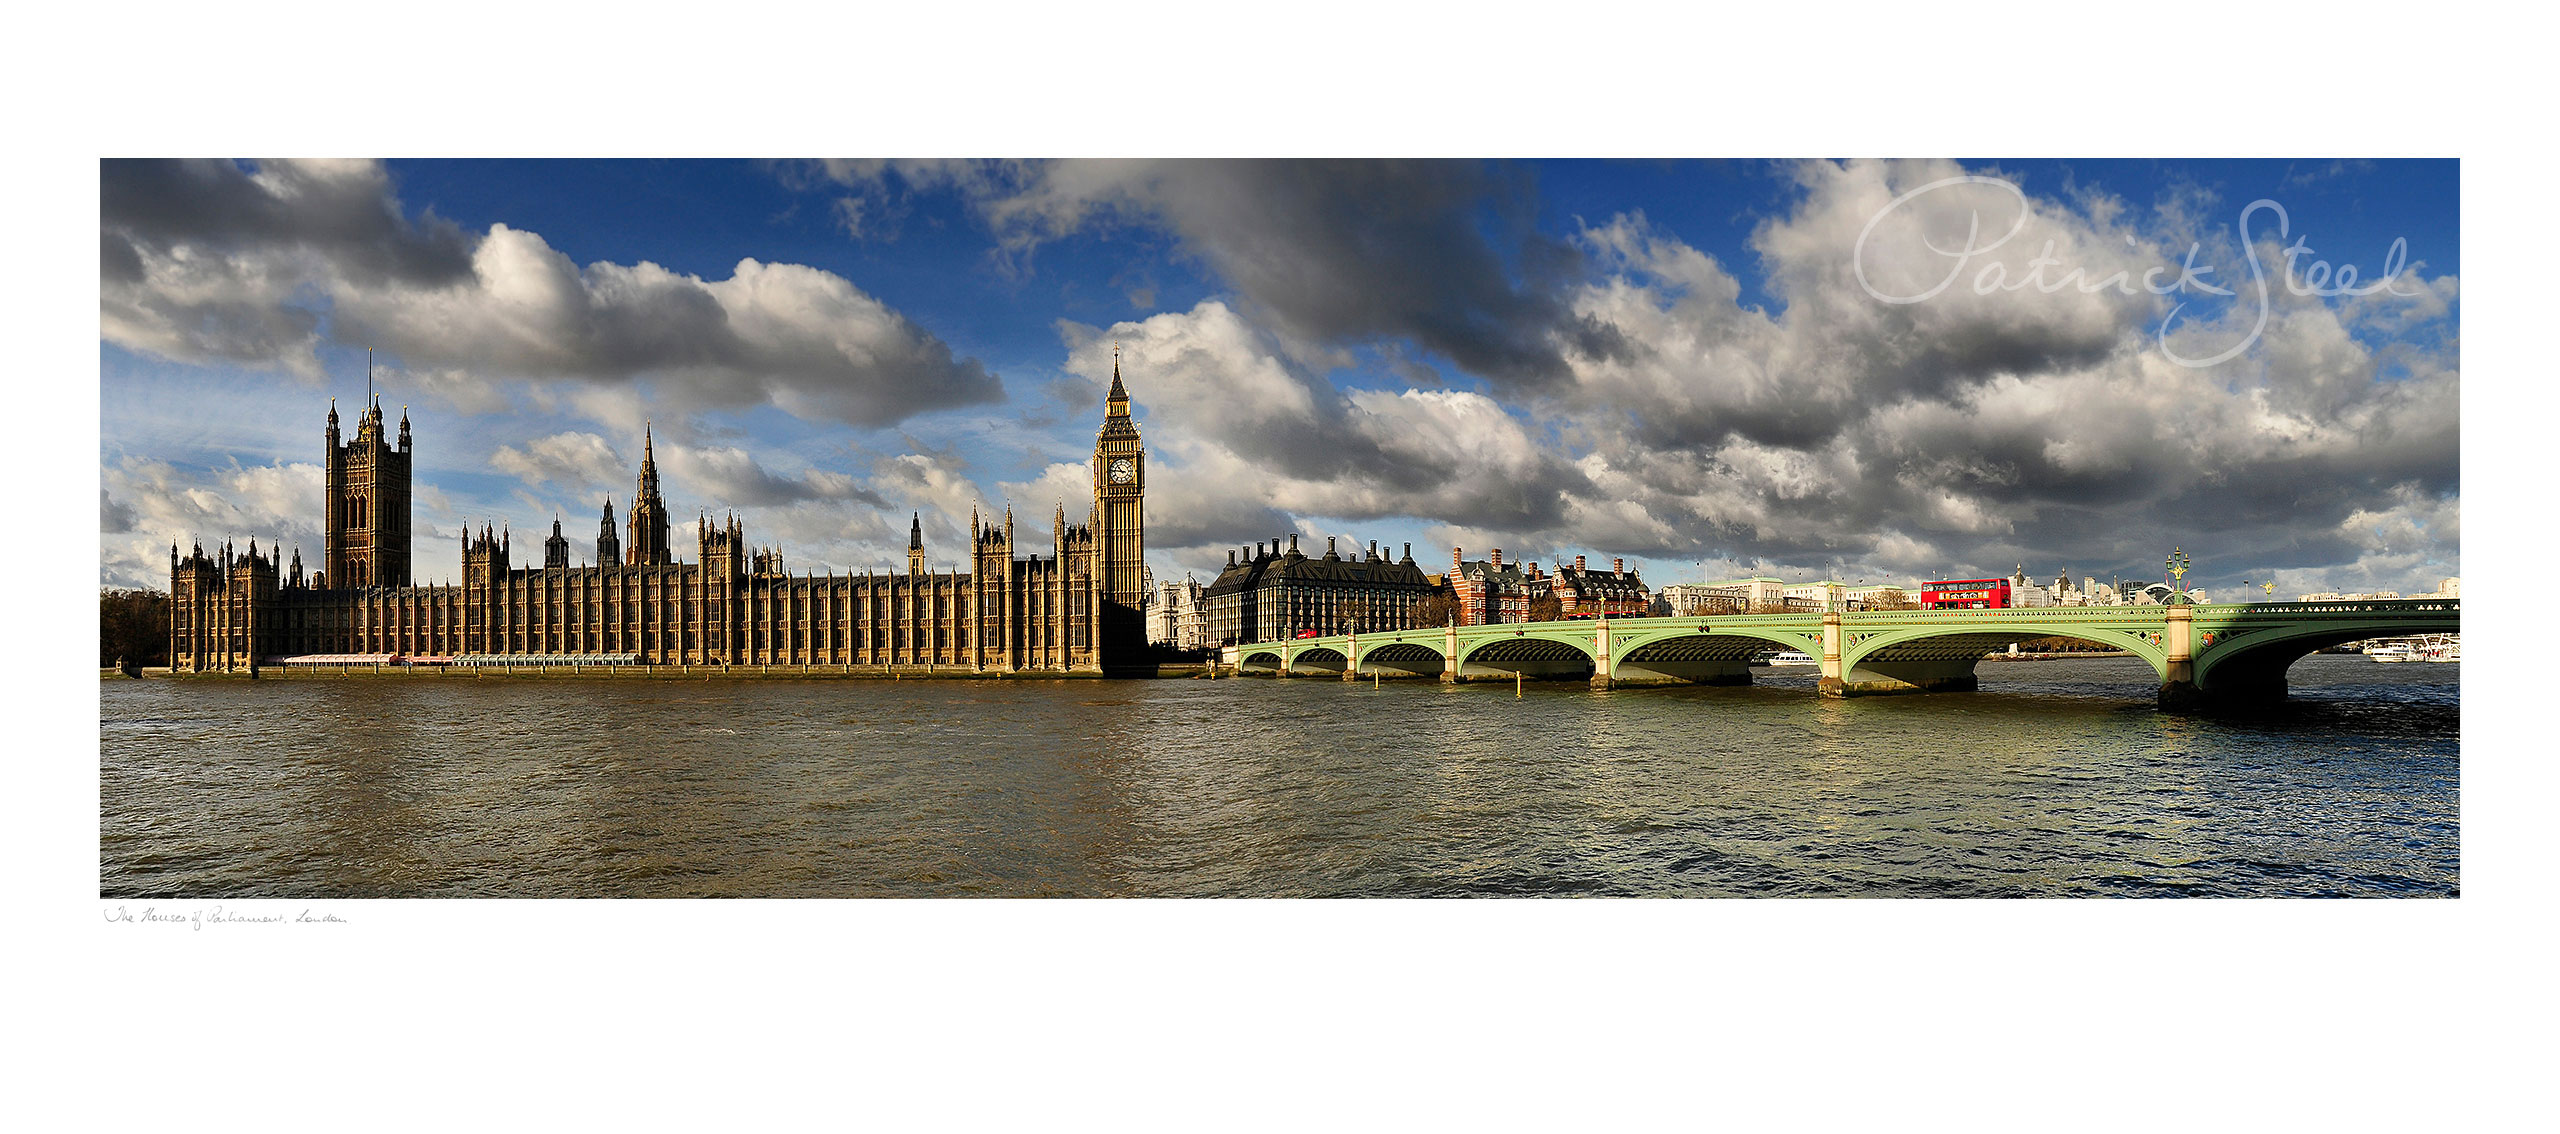 Title: The Palace of Westminster | <a href=